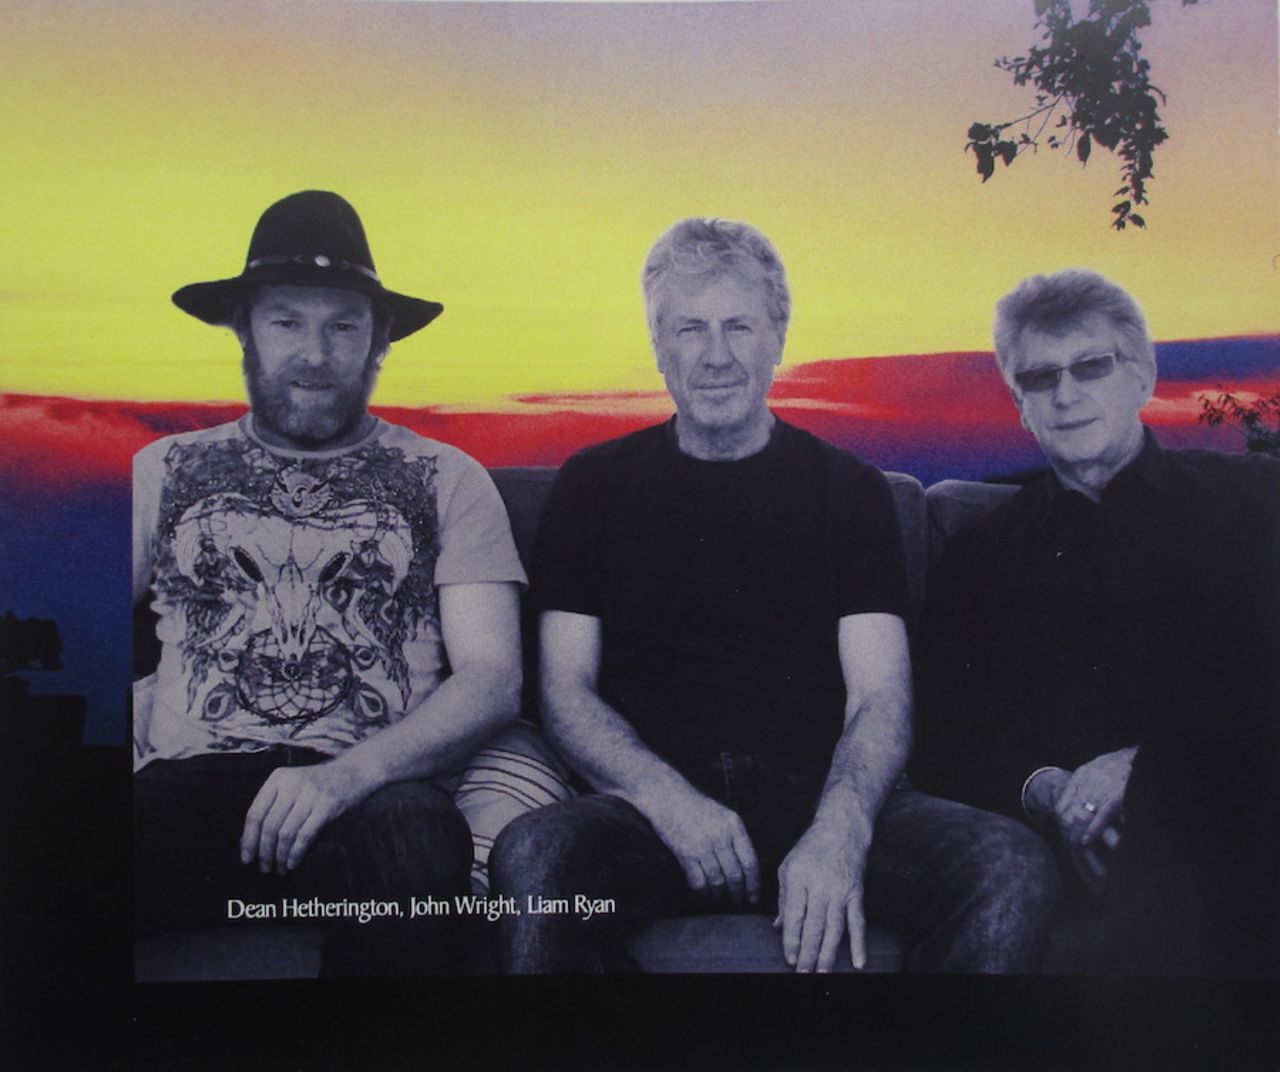 Dean Heatherington, John Wright and Liam Ryan on the cover of their album, <I>Red Skies</I>